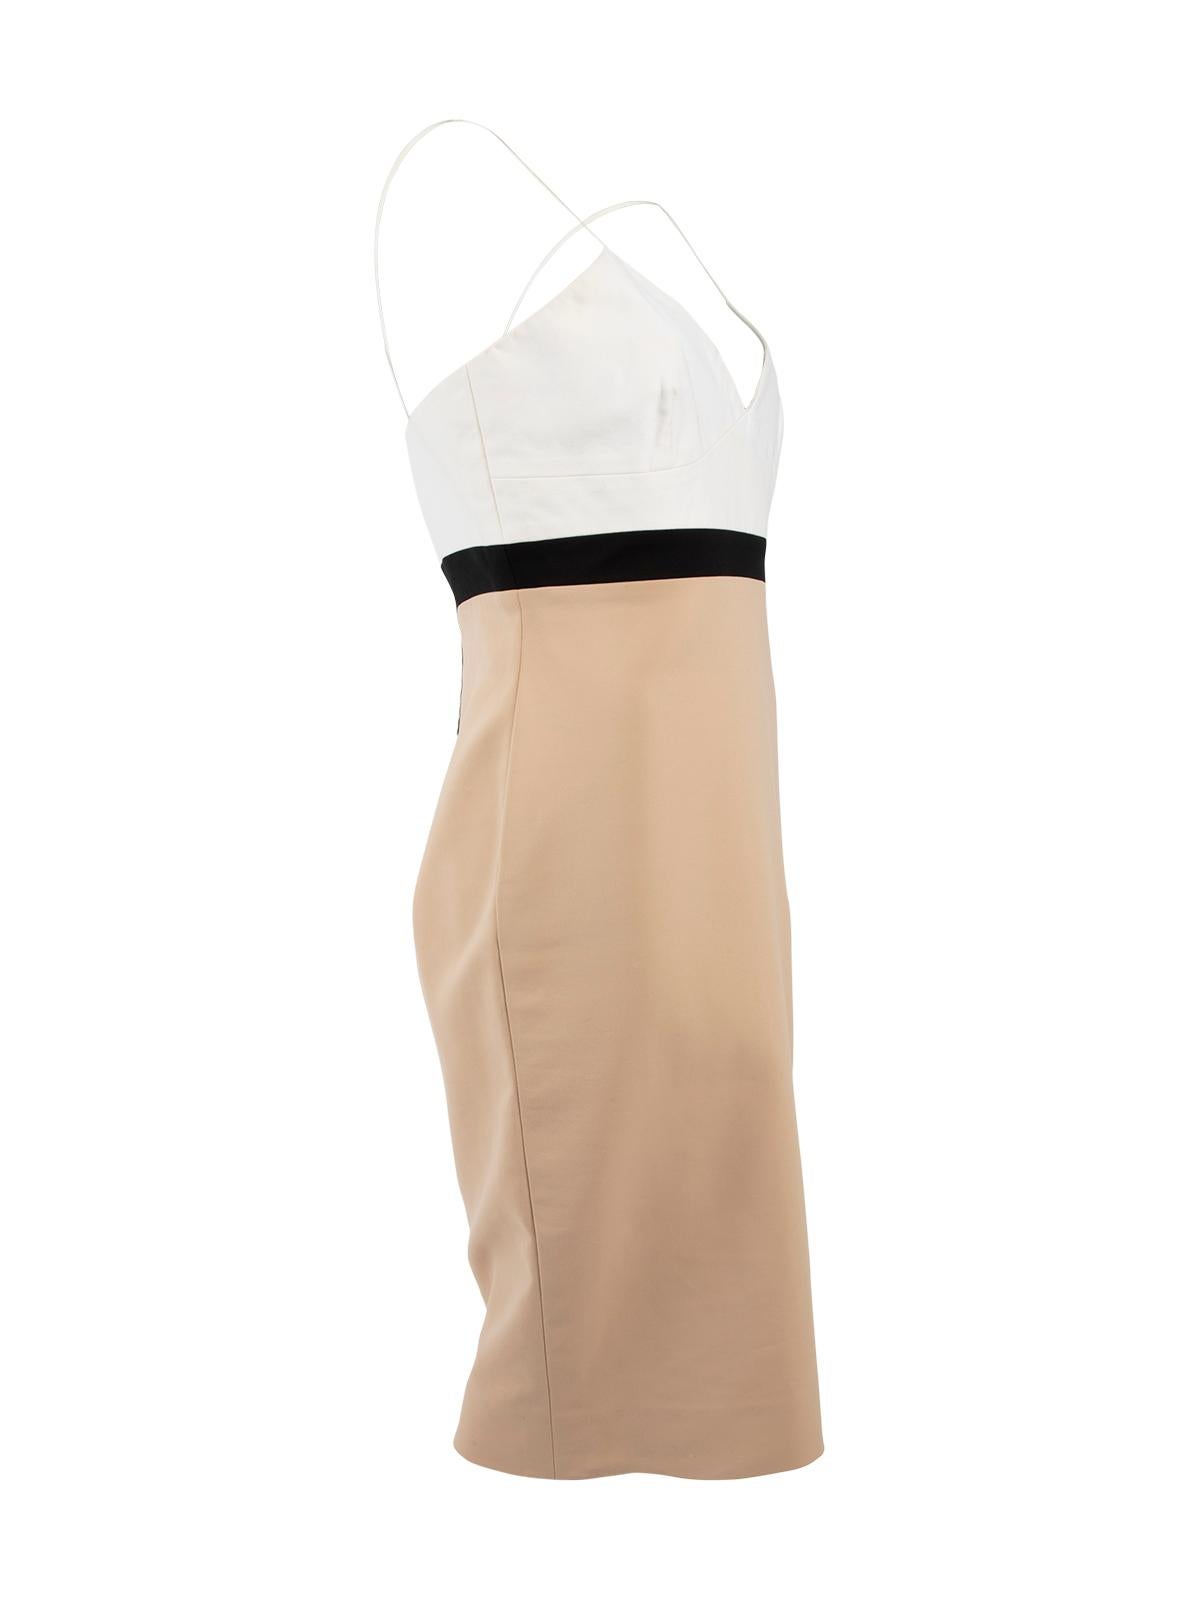 CONDITION is Good. Some wear to dress is evident. Small stain in the back and one loose thread on this used Victoria Beckham designer resale item.   Details  Dress No 319 White, black, beige Cotton Sleeveless Midi V Neck   Made in England  